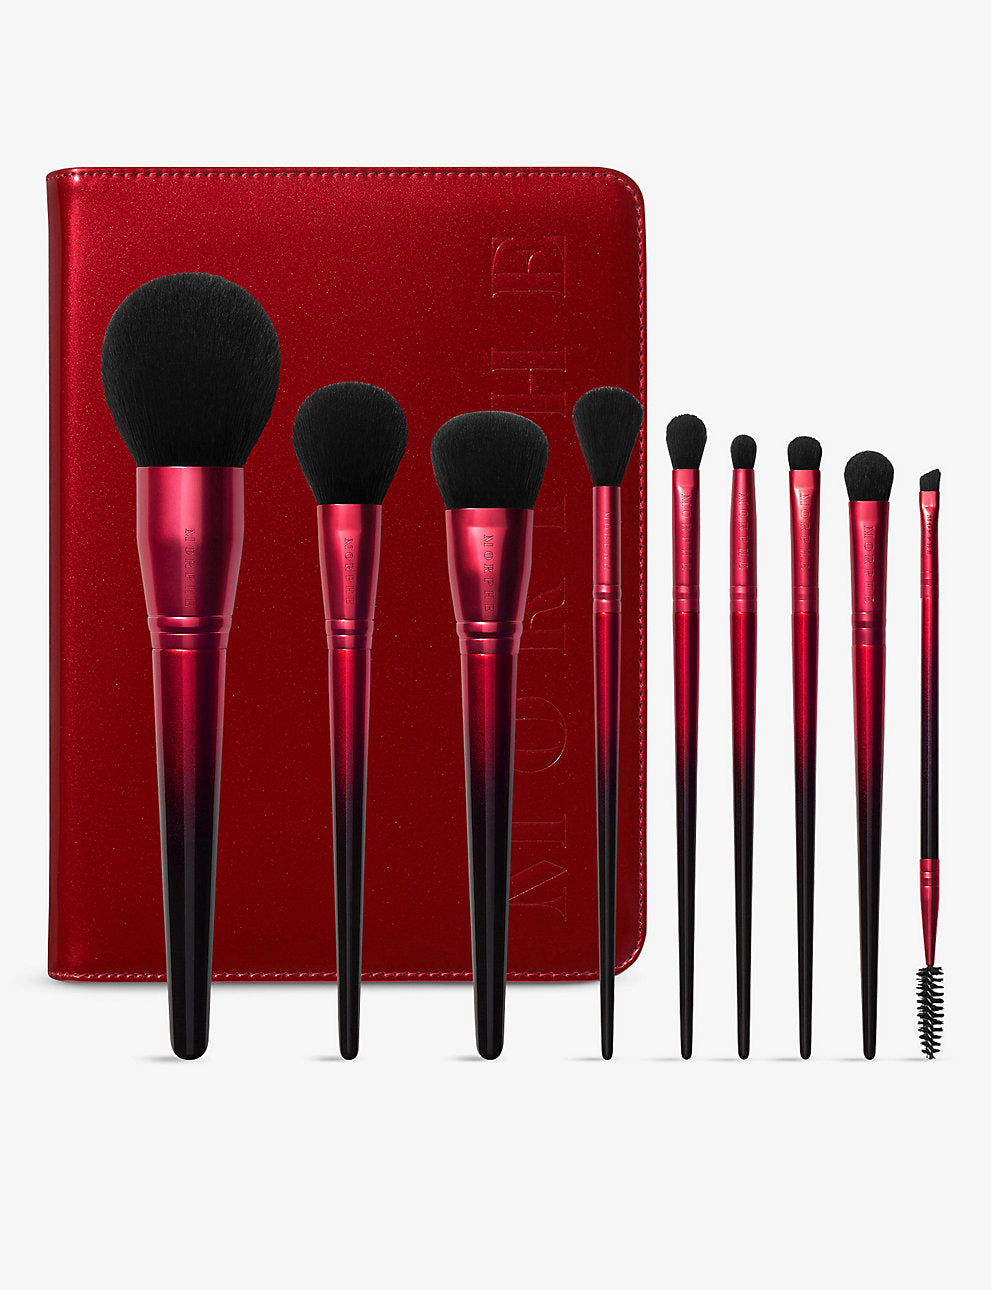 MORPHE, ROYAL SWEEP 9pc BRUSH COLLECTION AND CASE WORTH